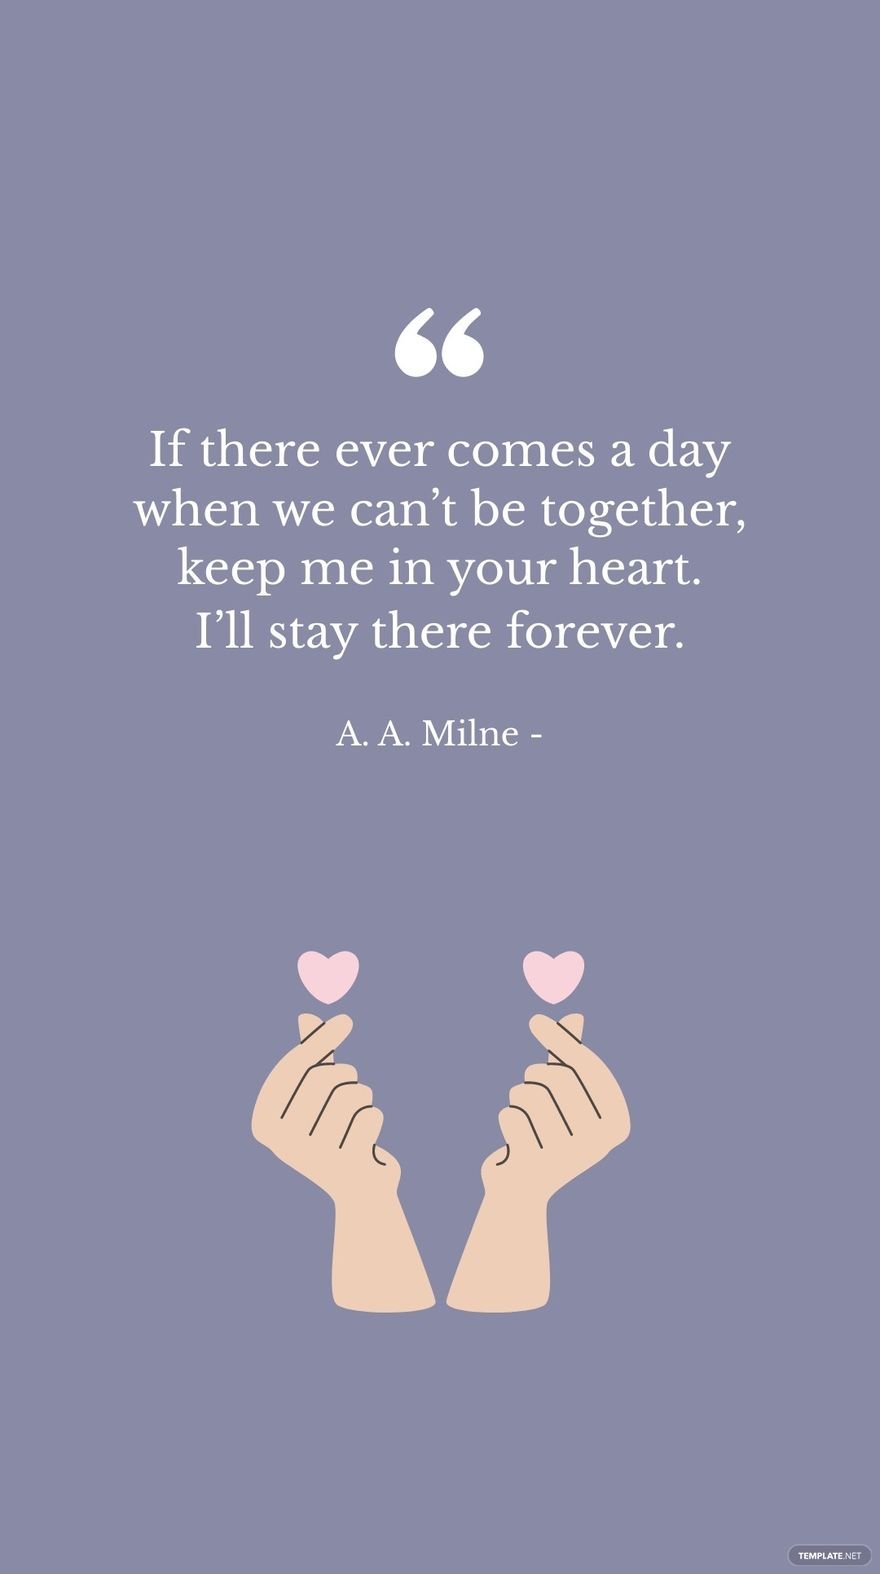 A. A. Milne - If there ever comes a day when we can’t be together, keep me in your heart. I’ll stay there forever. in JPG